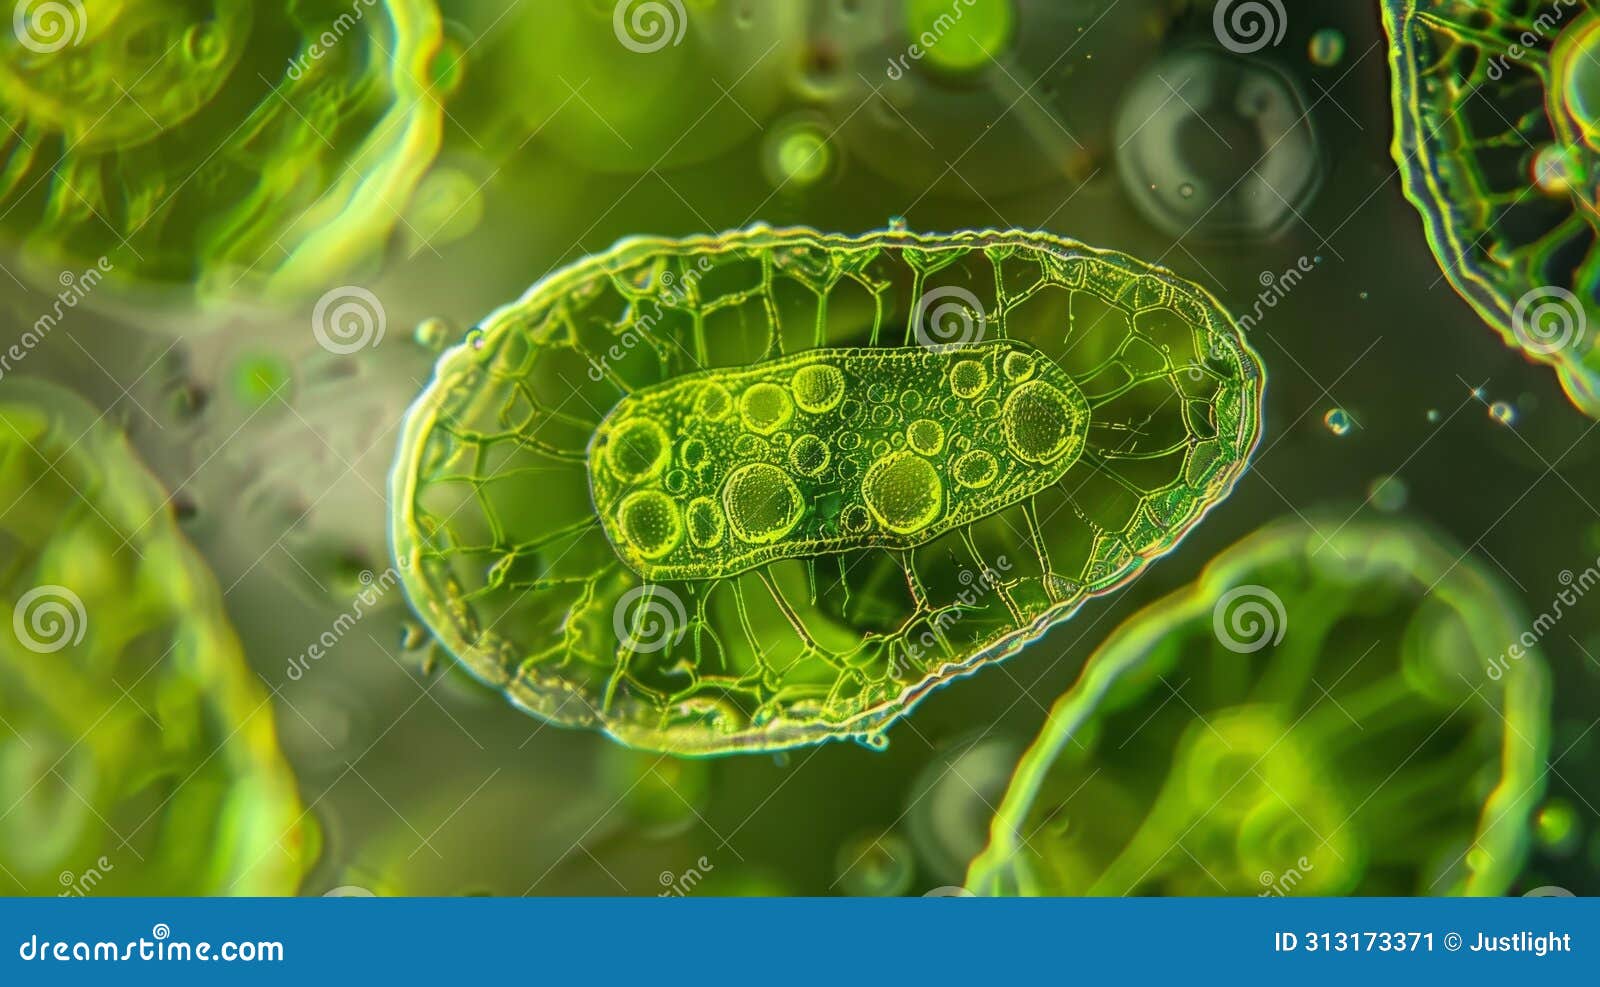 in this image we see a closeup of a chloroplast within the algae cell. the green ovald organelle is filled with